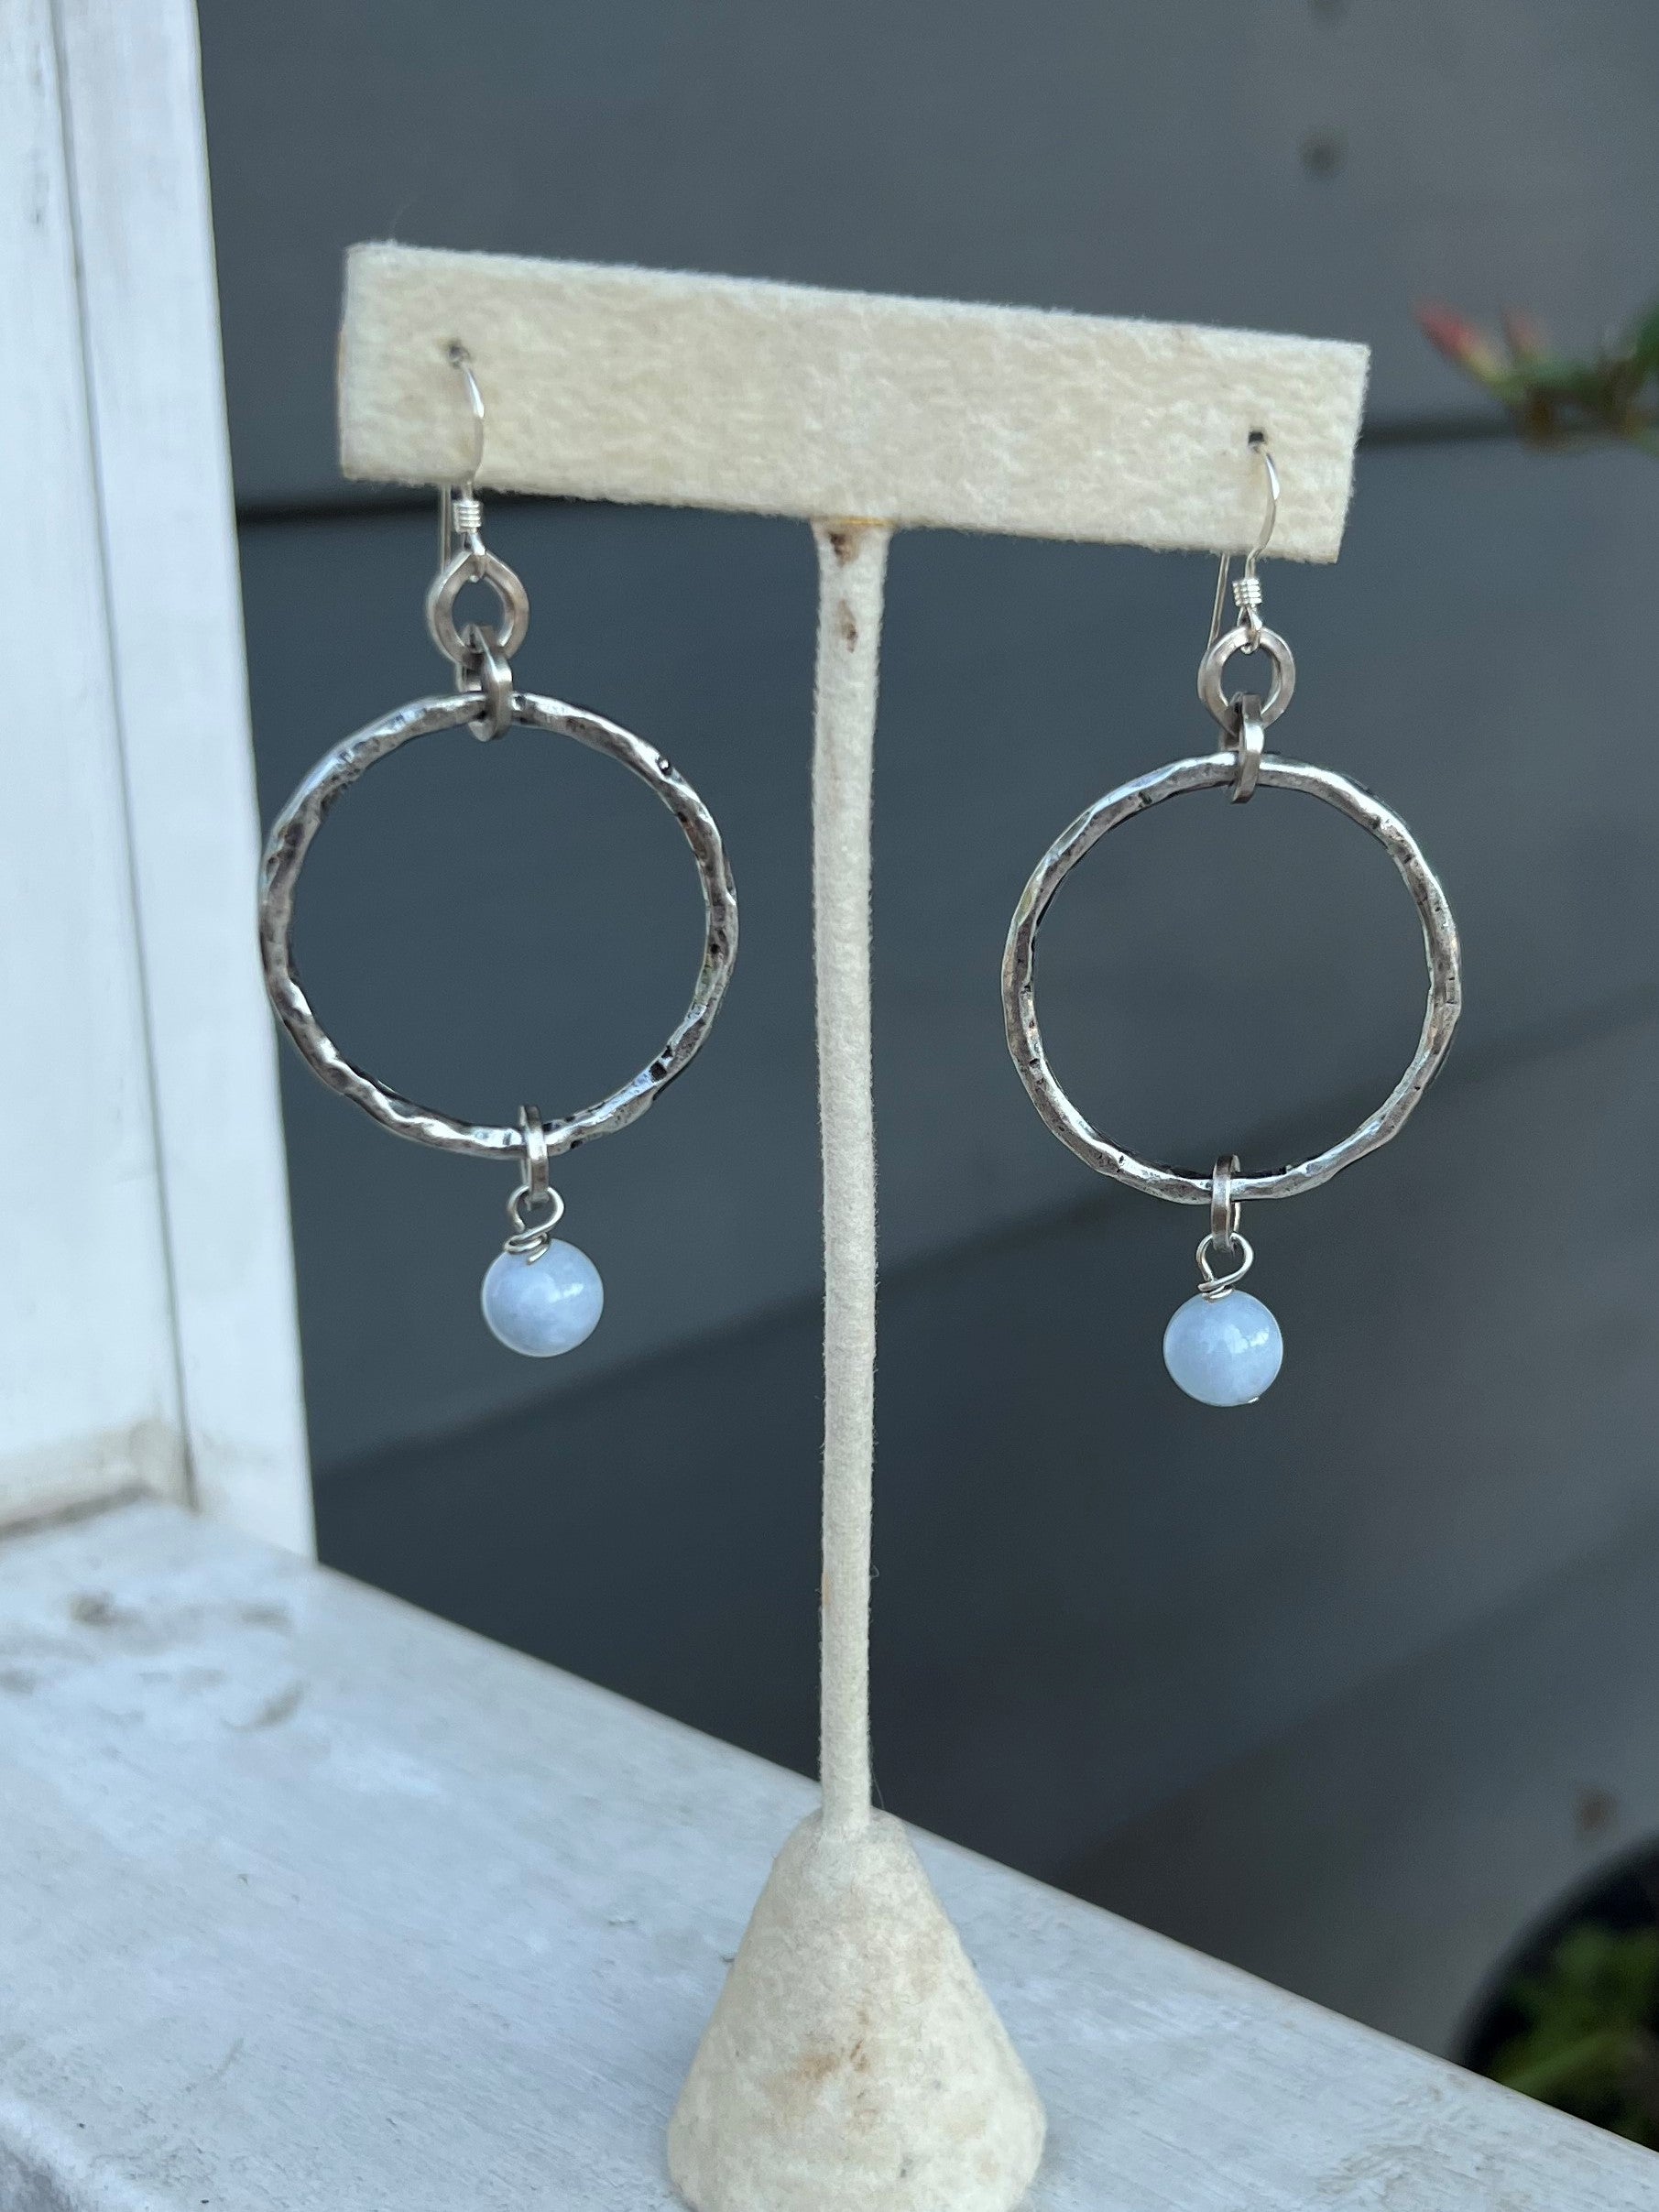 Earrings with Hoop and Charm